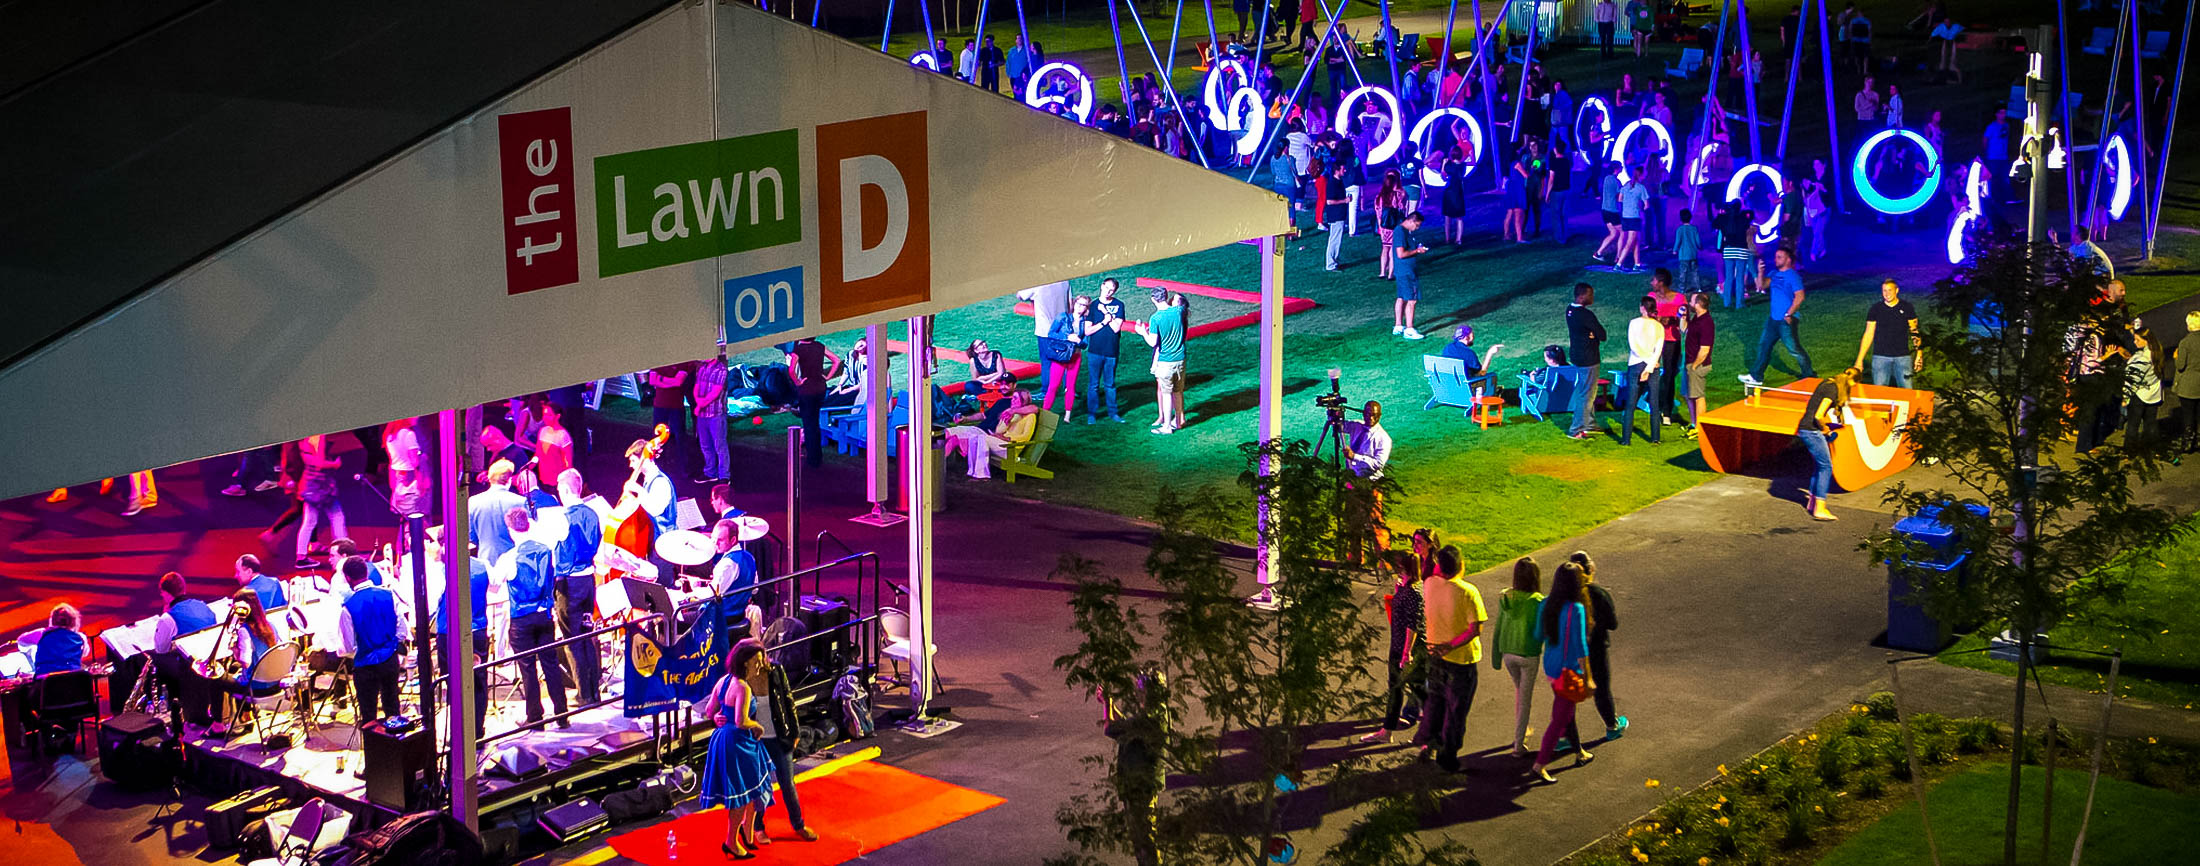 The Lawn On D Introduces New Options for Hosting Private Events.